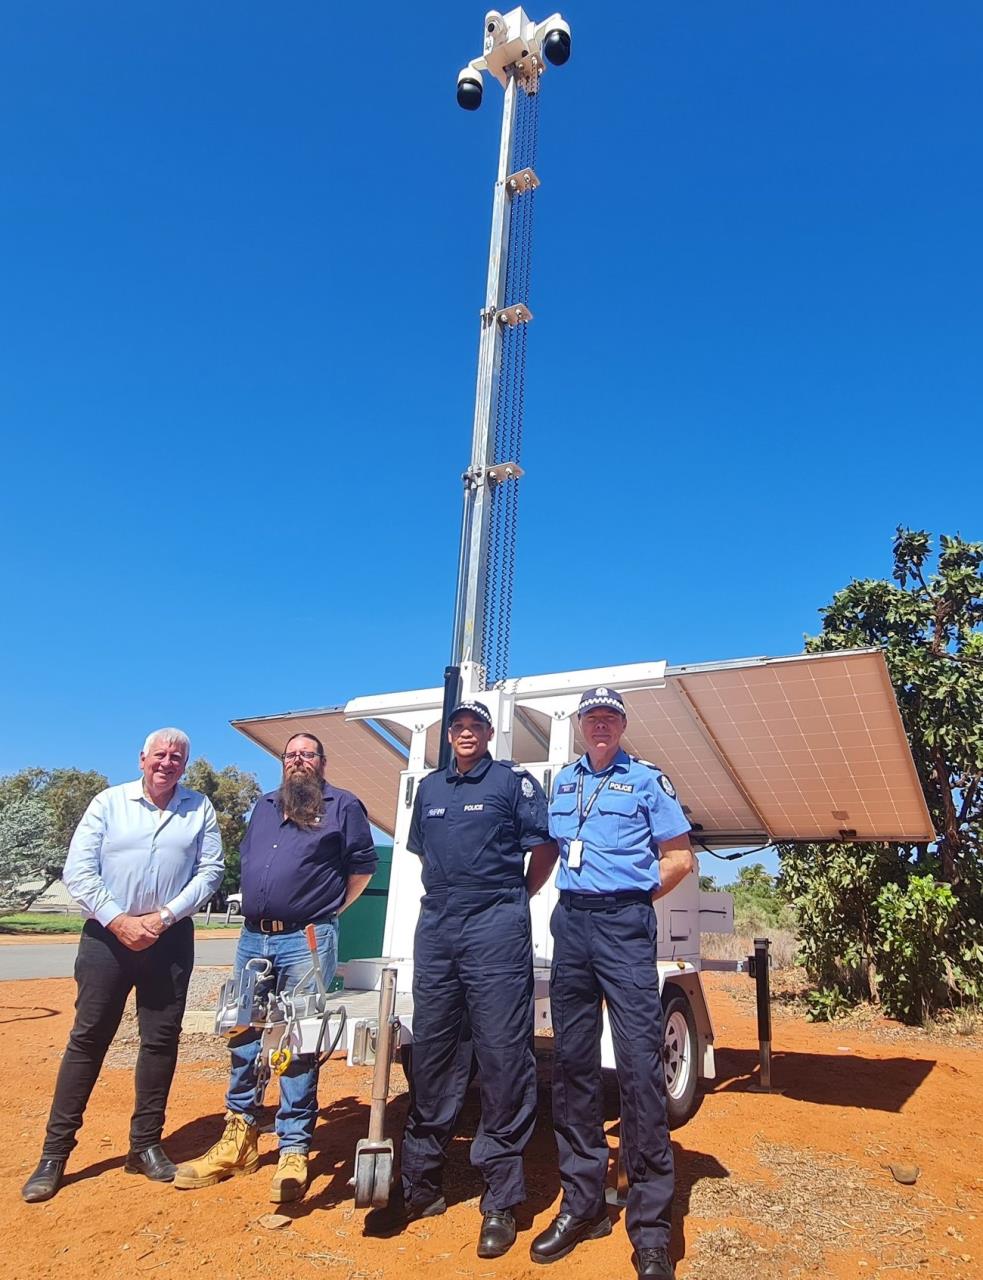 Portable CCTV trailer helps raise community safety in Hedland